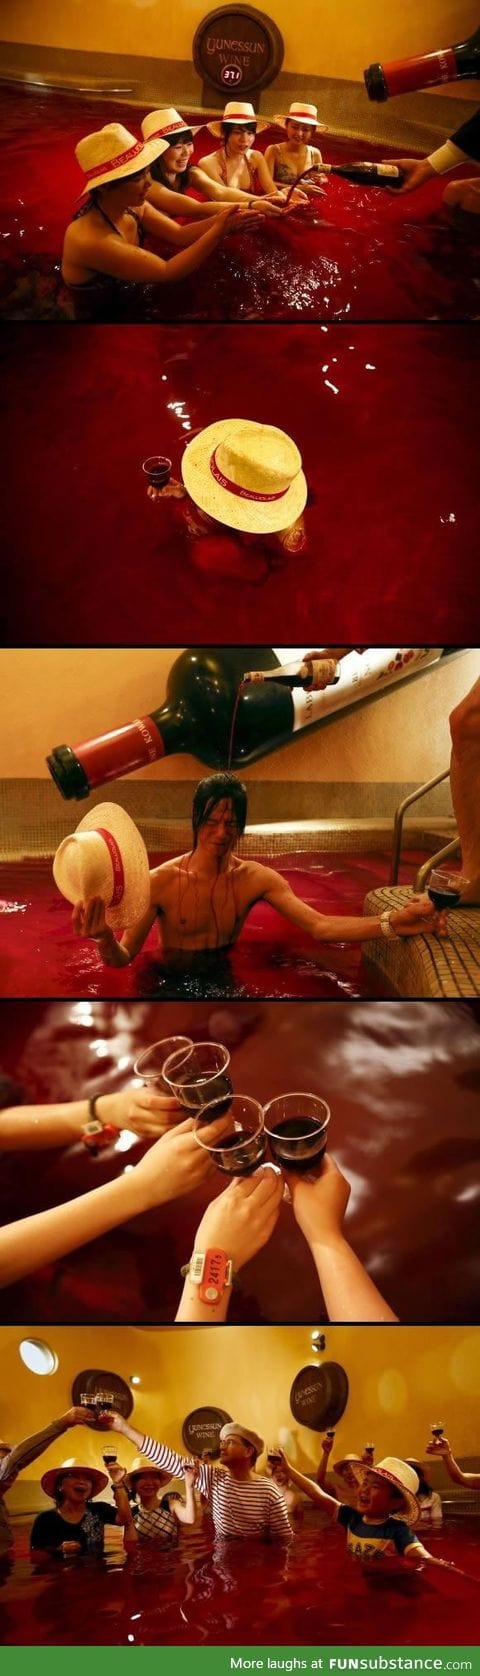 People in Japan celebrate a French holiday by bathing in a pool of wine